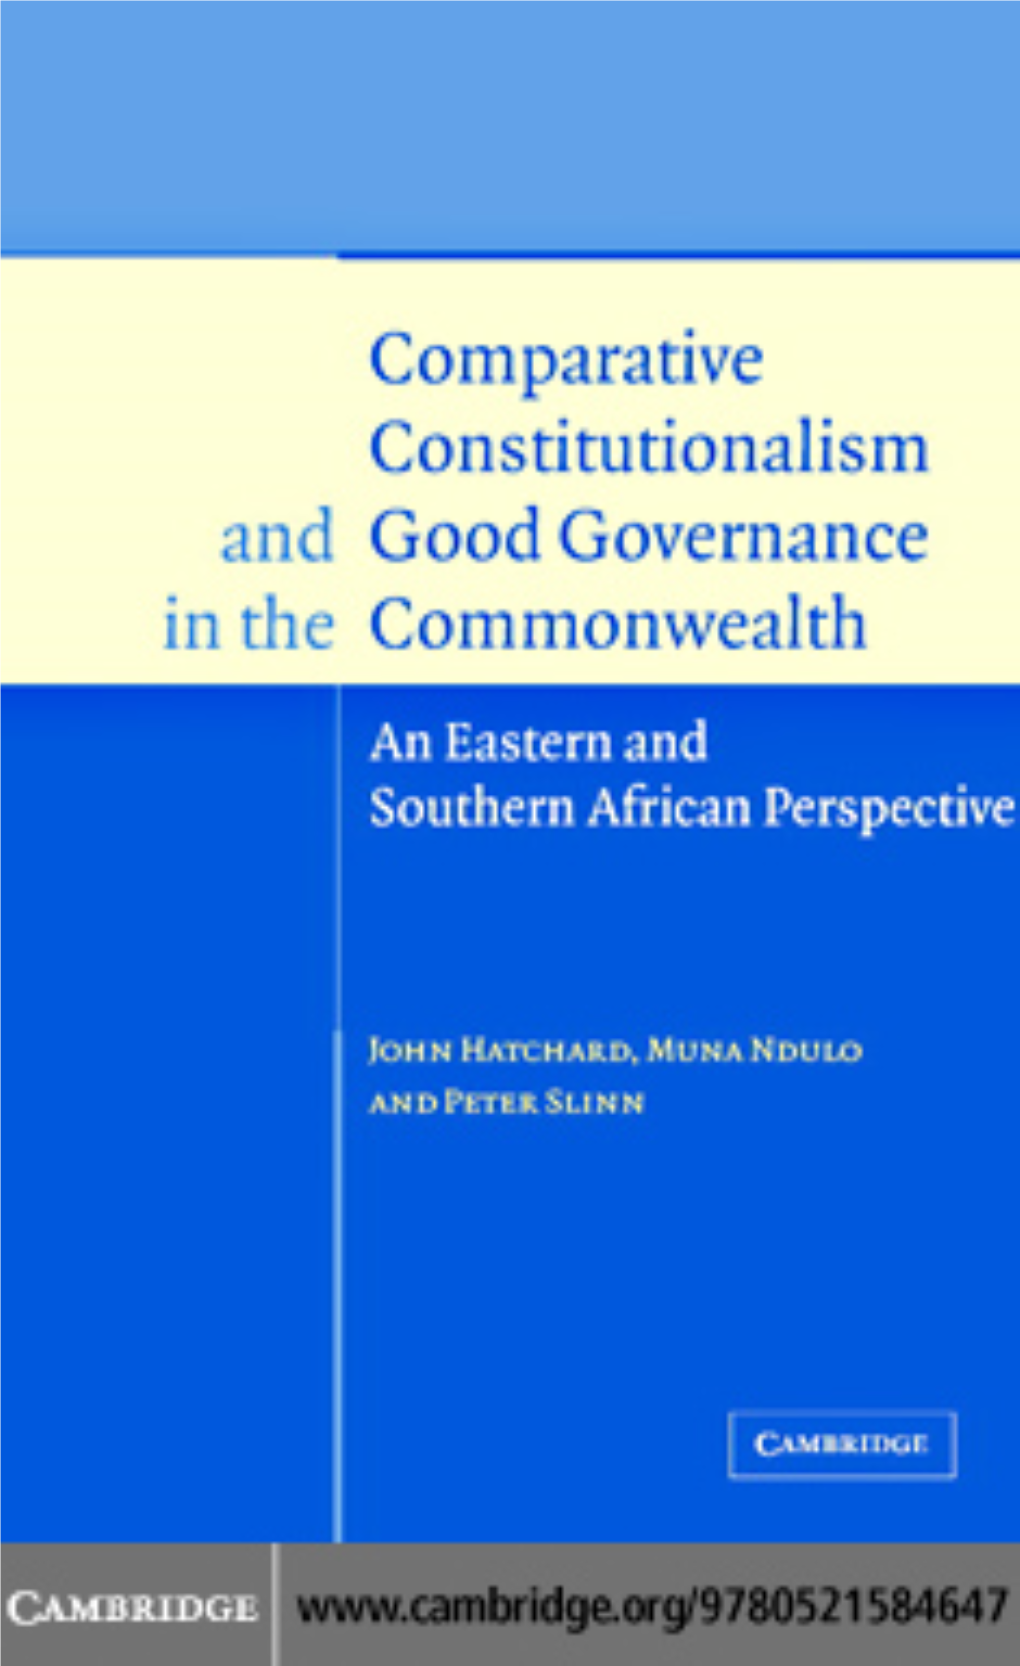 GOOD GOVERNANCE Comparative Constitutionalism and Good